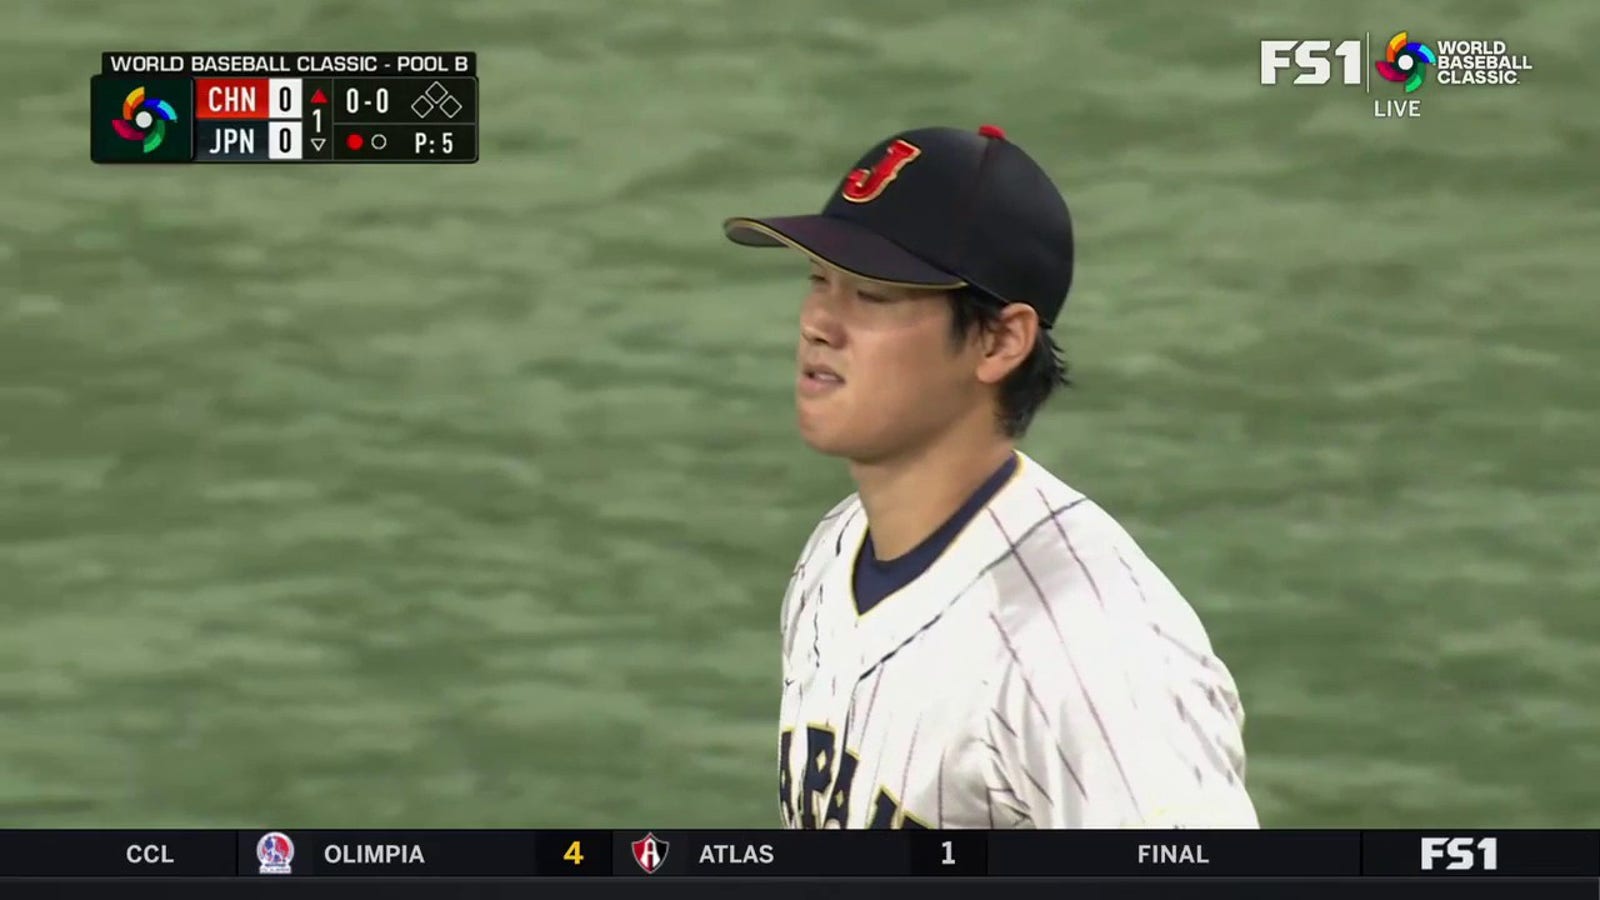 Japan's Shohei Ohtani records his first strikeout in the 2023 World Baseball Classic against China!